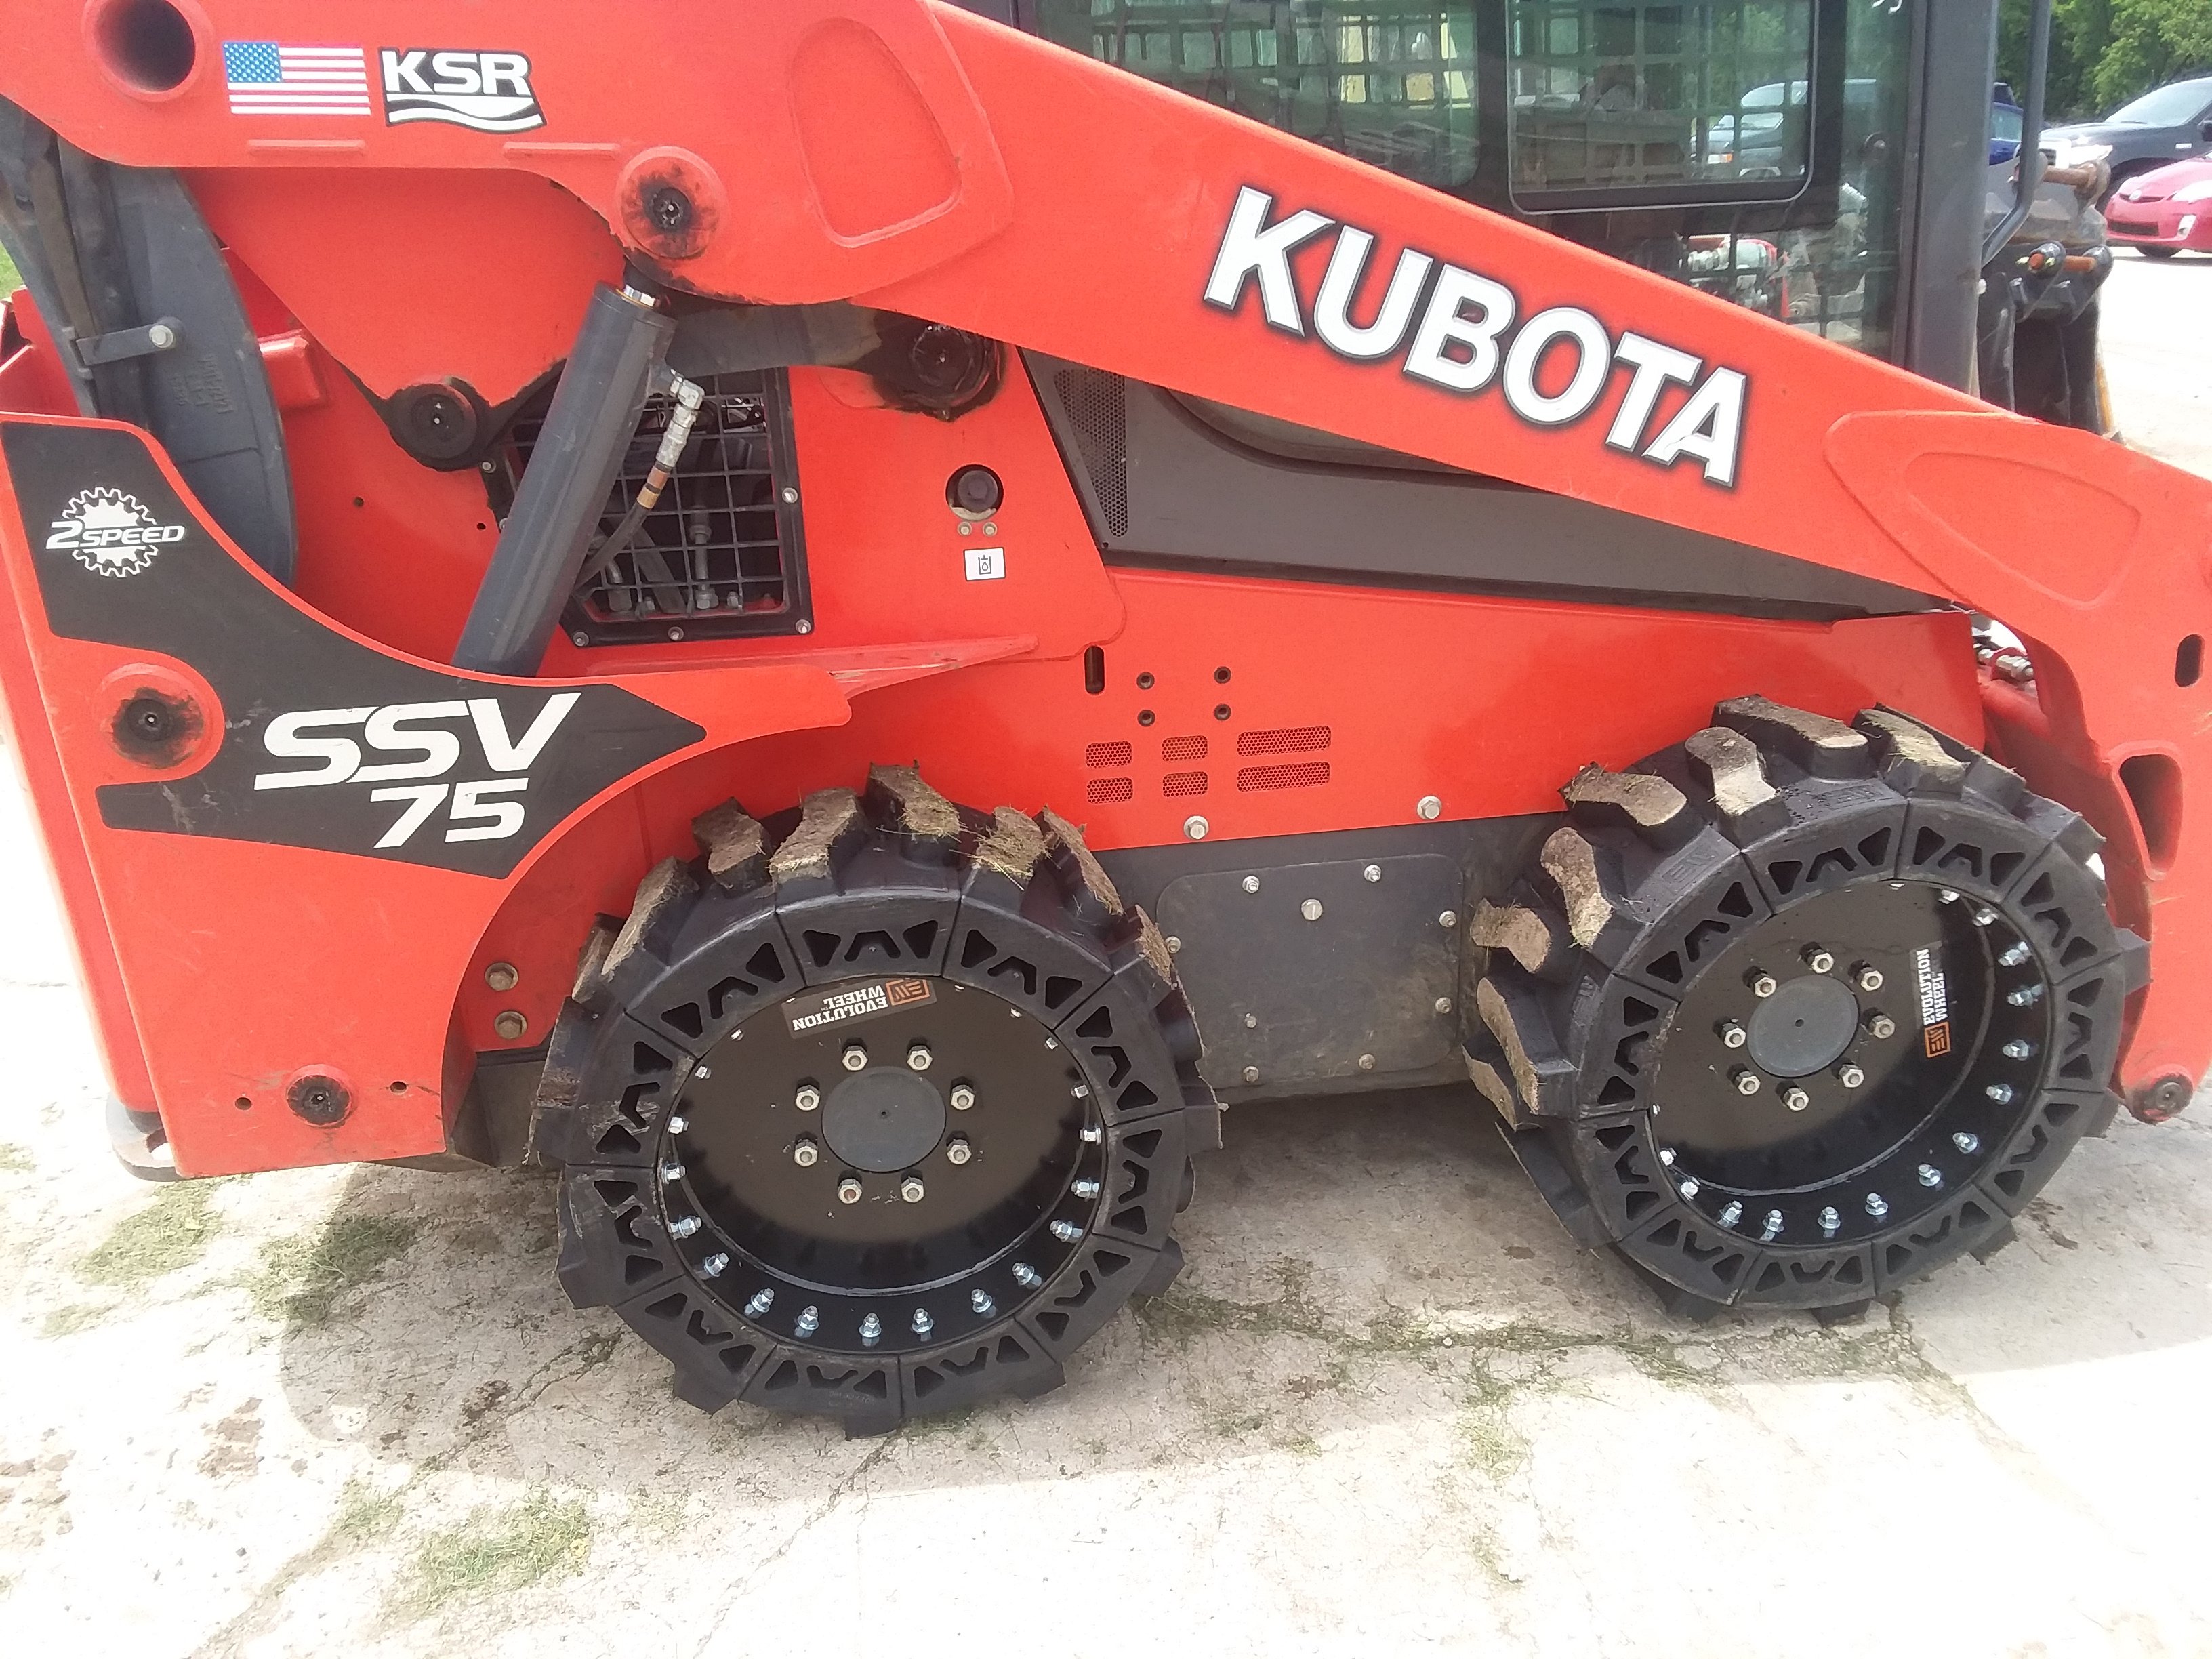 We have fitted all terrain Bobcat tires on this red Kubota skid steer.